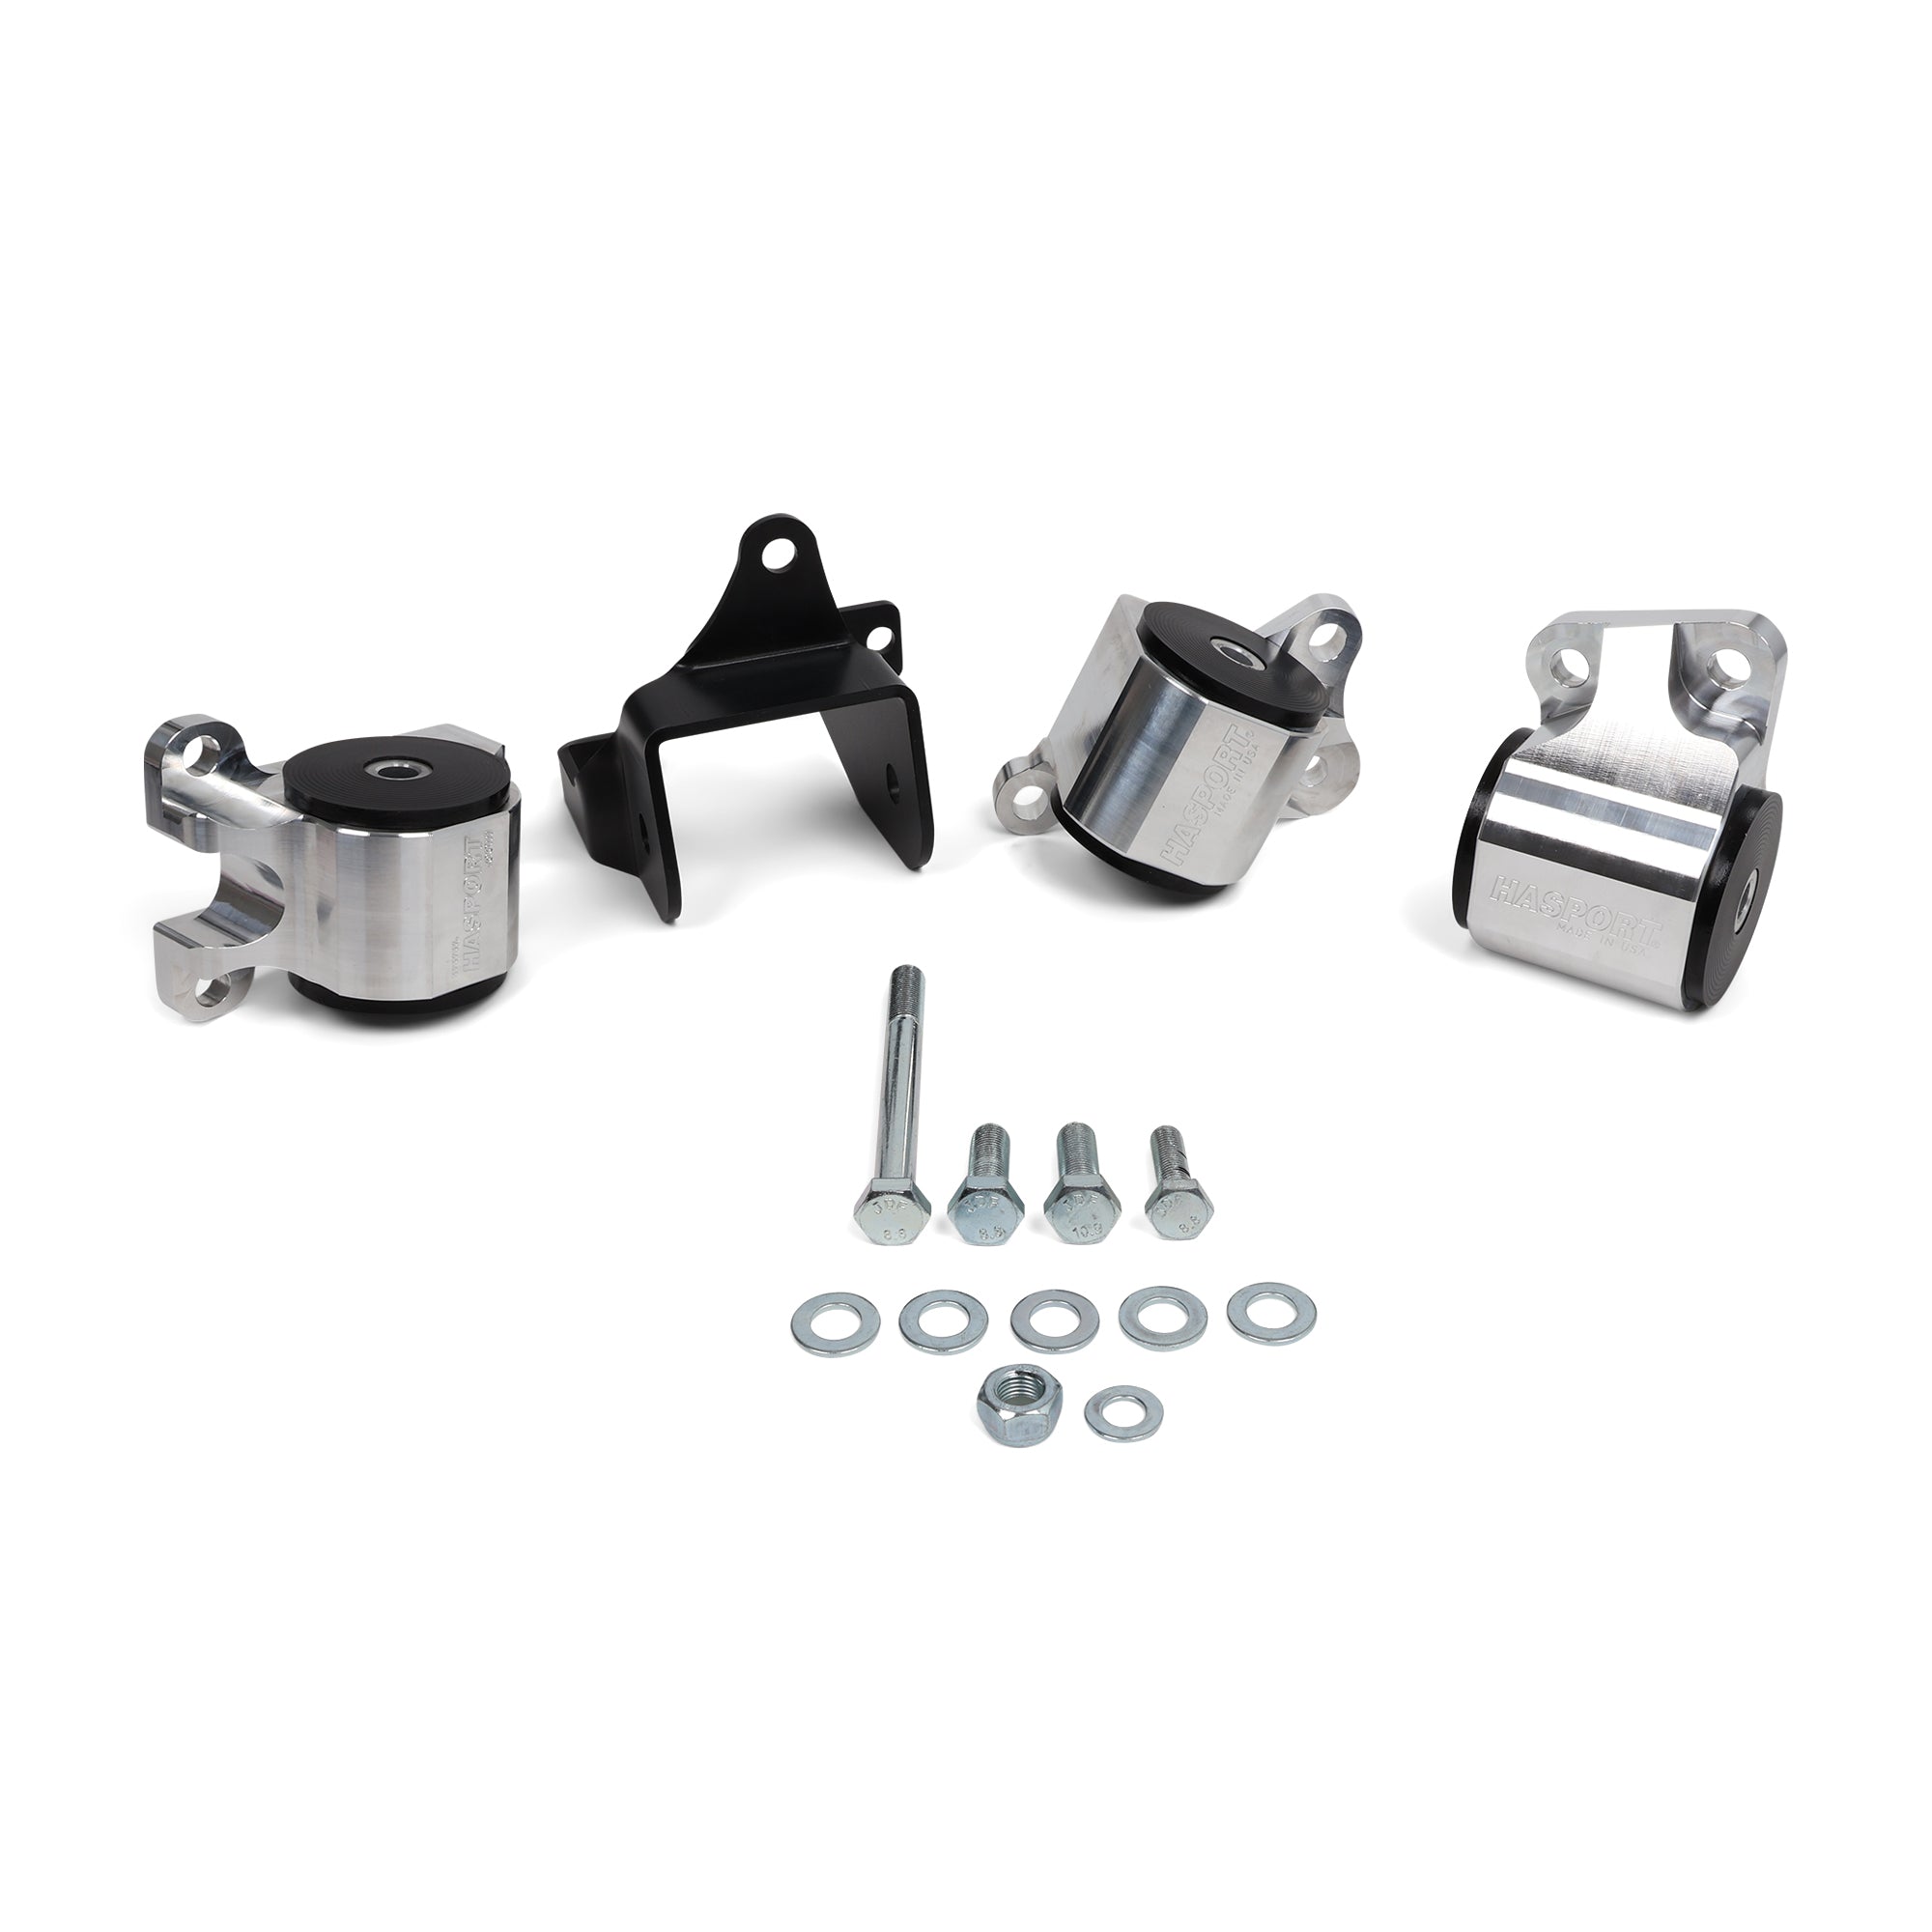 Hasport Performance Stock Replacement B-Series/D-Series Engine Mount Kit for 96-00 Civic